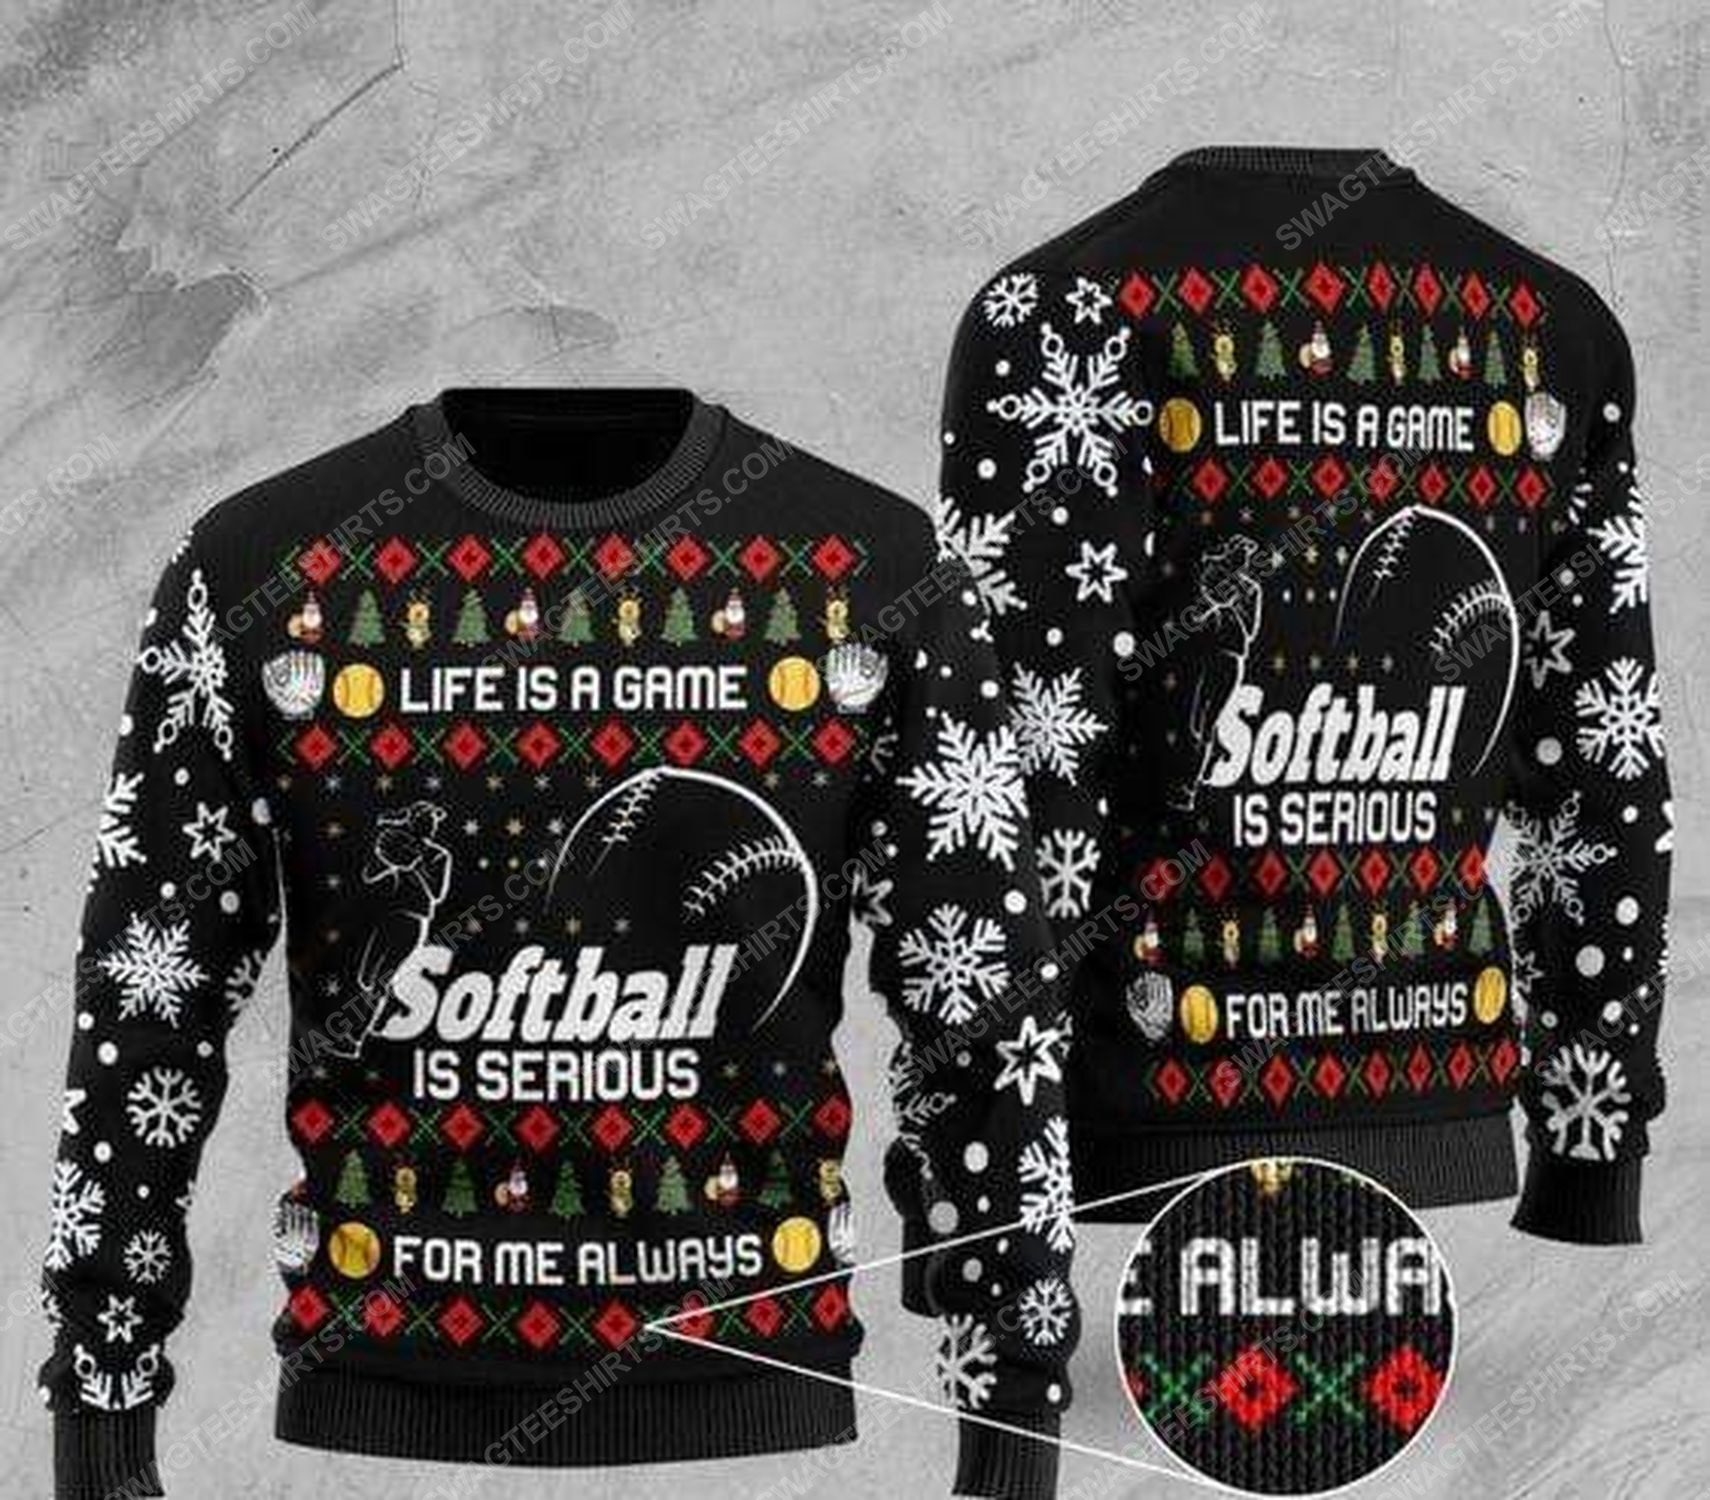 Life is a game softball is serious ugly christmas sweater 1 - Copy - Copy